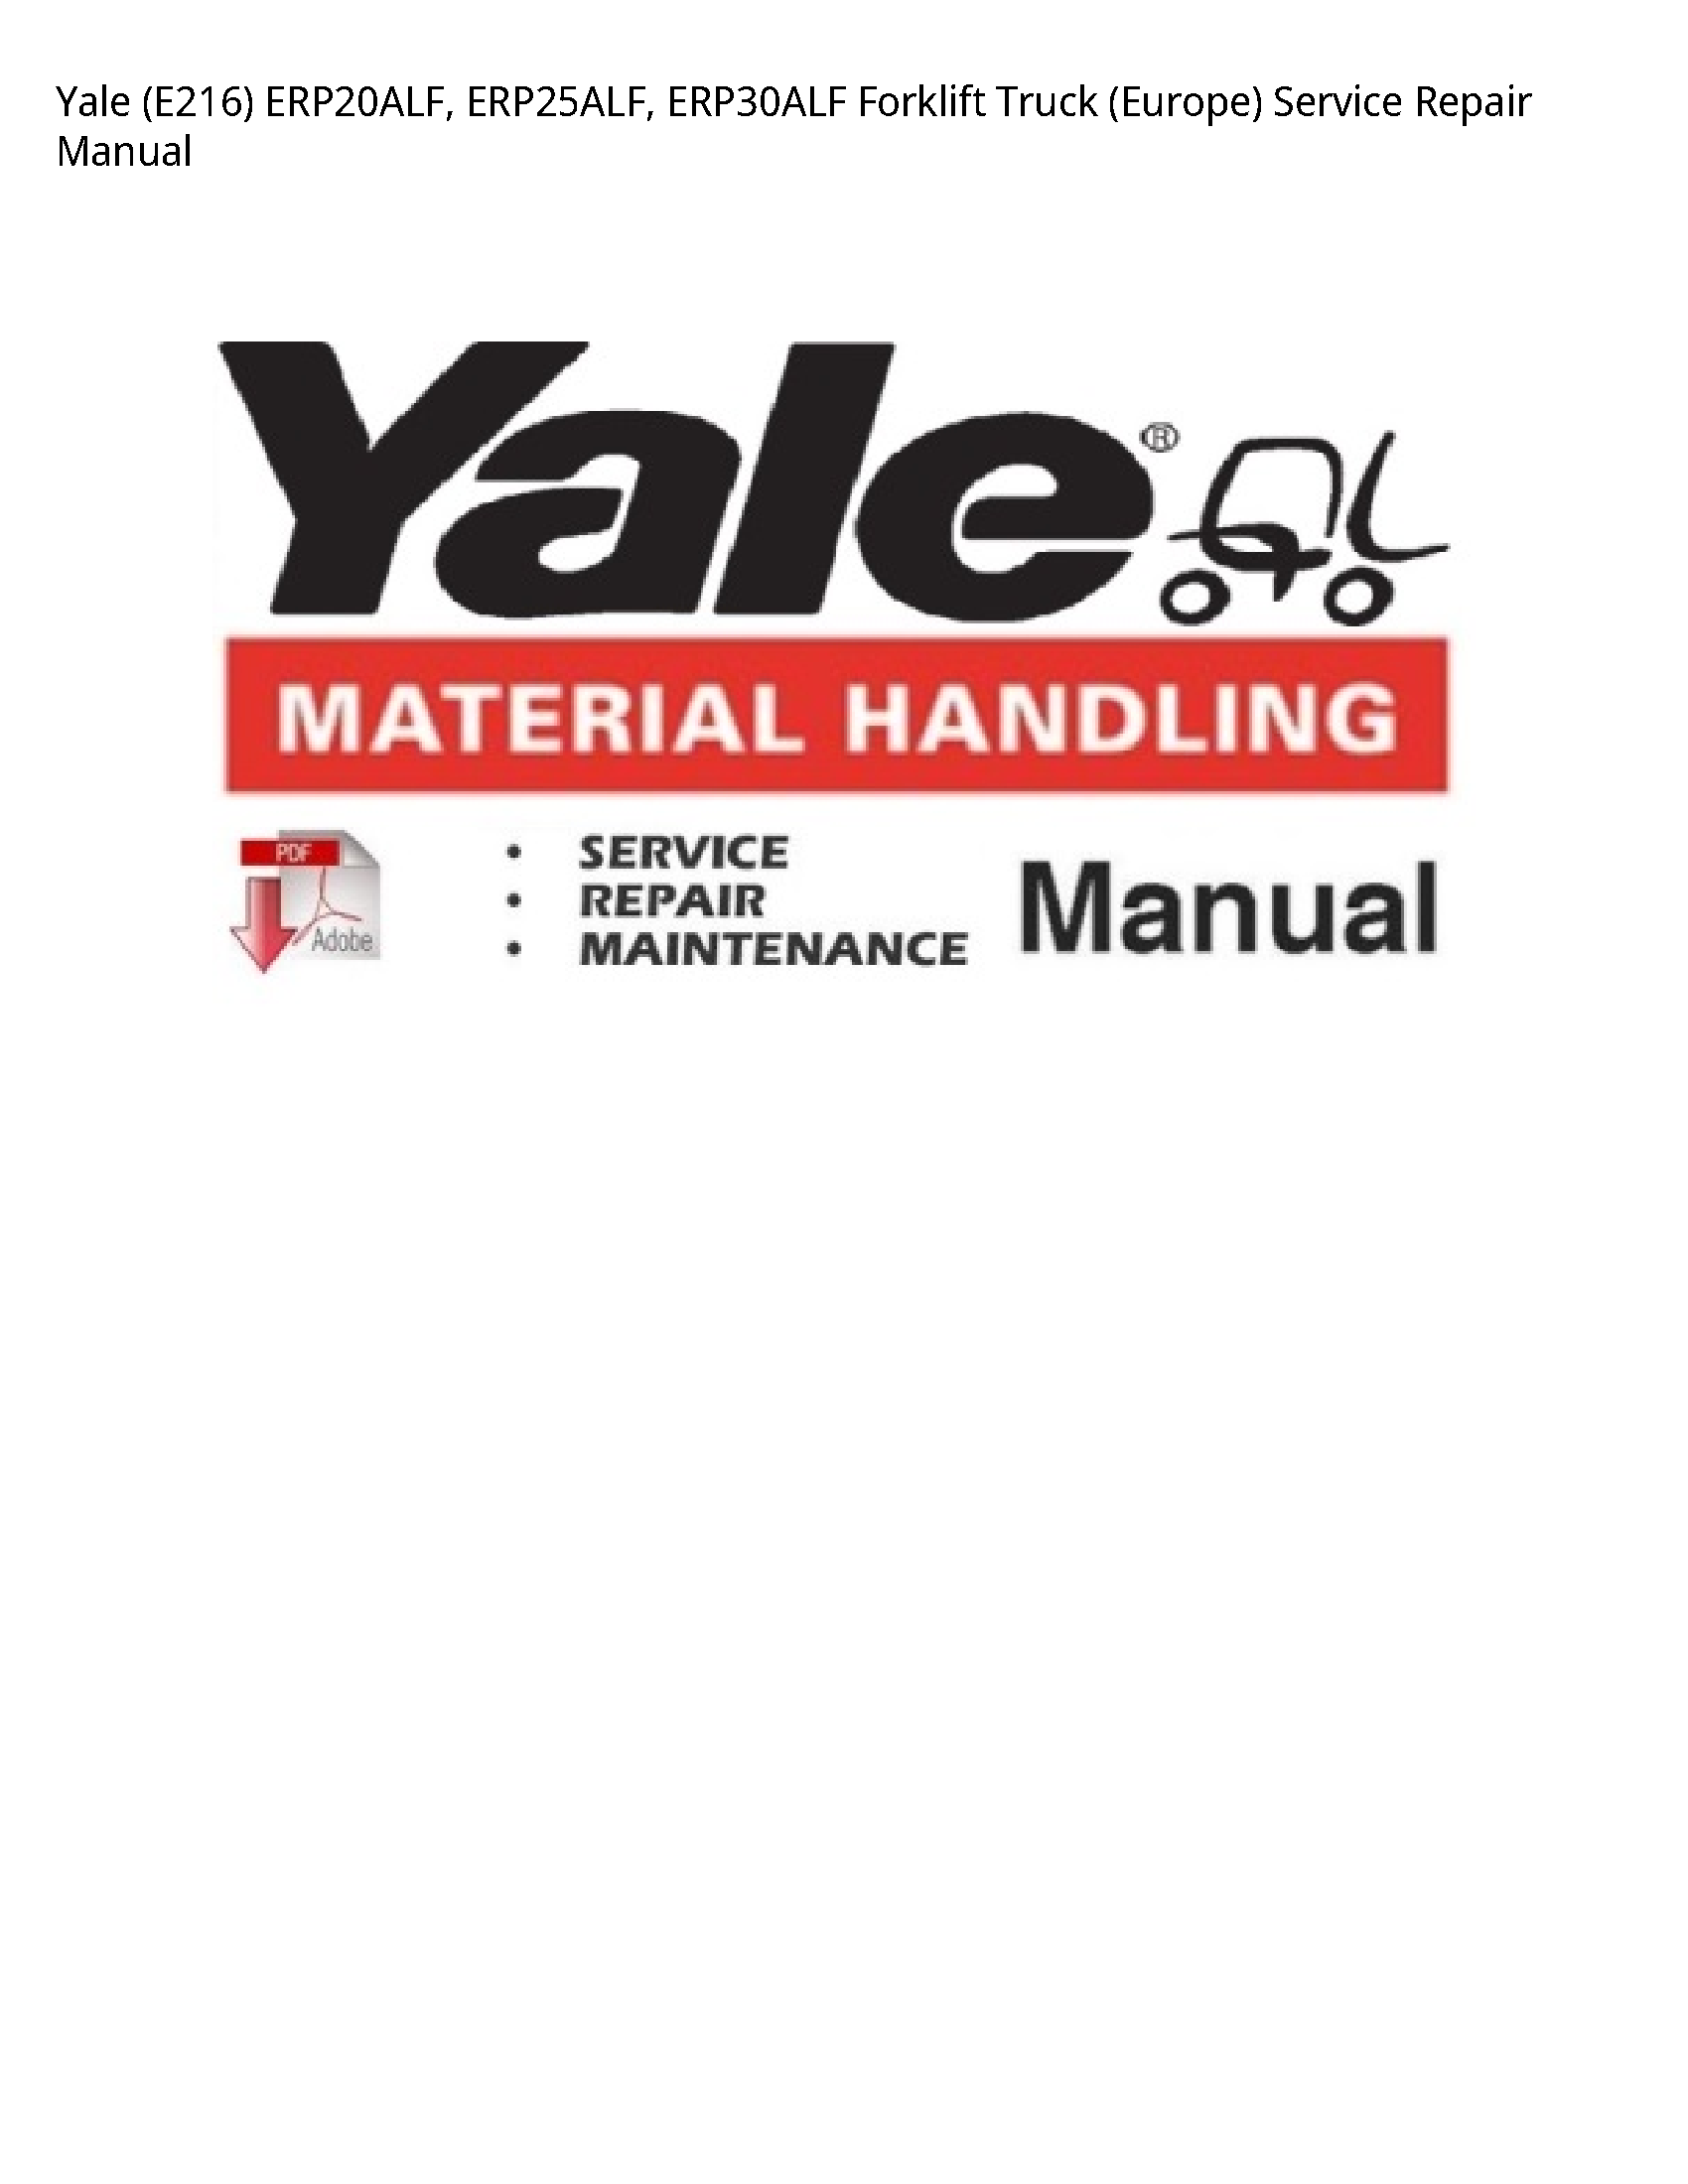 Yale (E216) Forklift Truck (Europe) manual